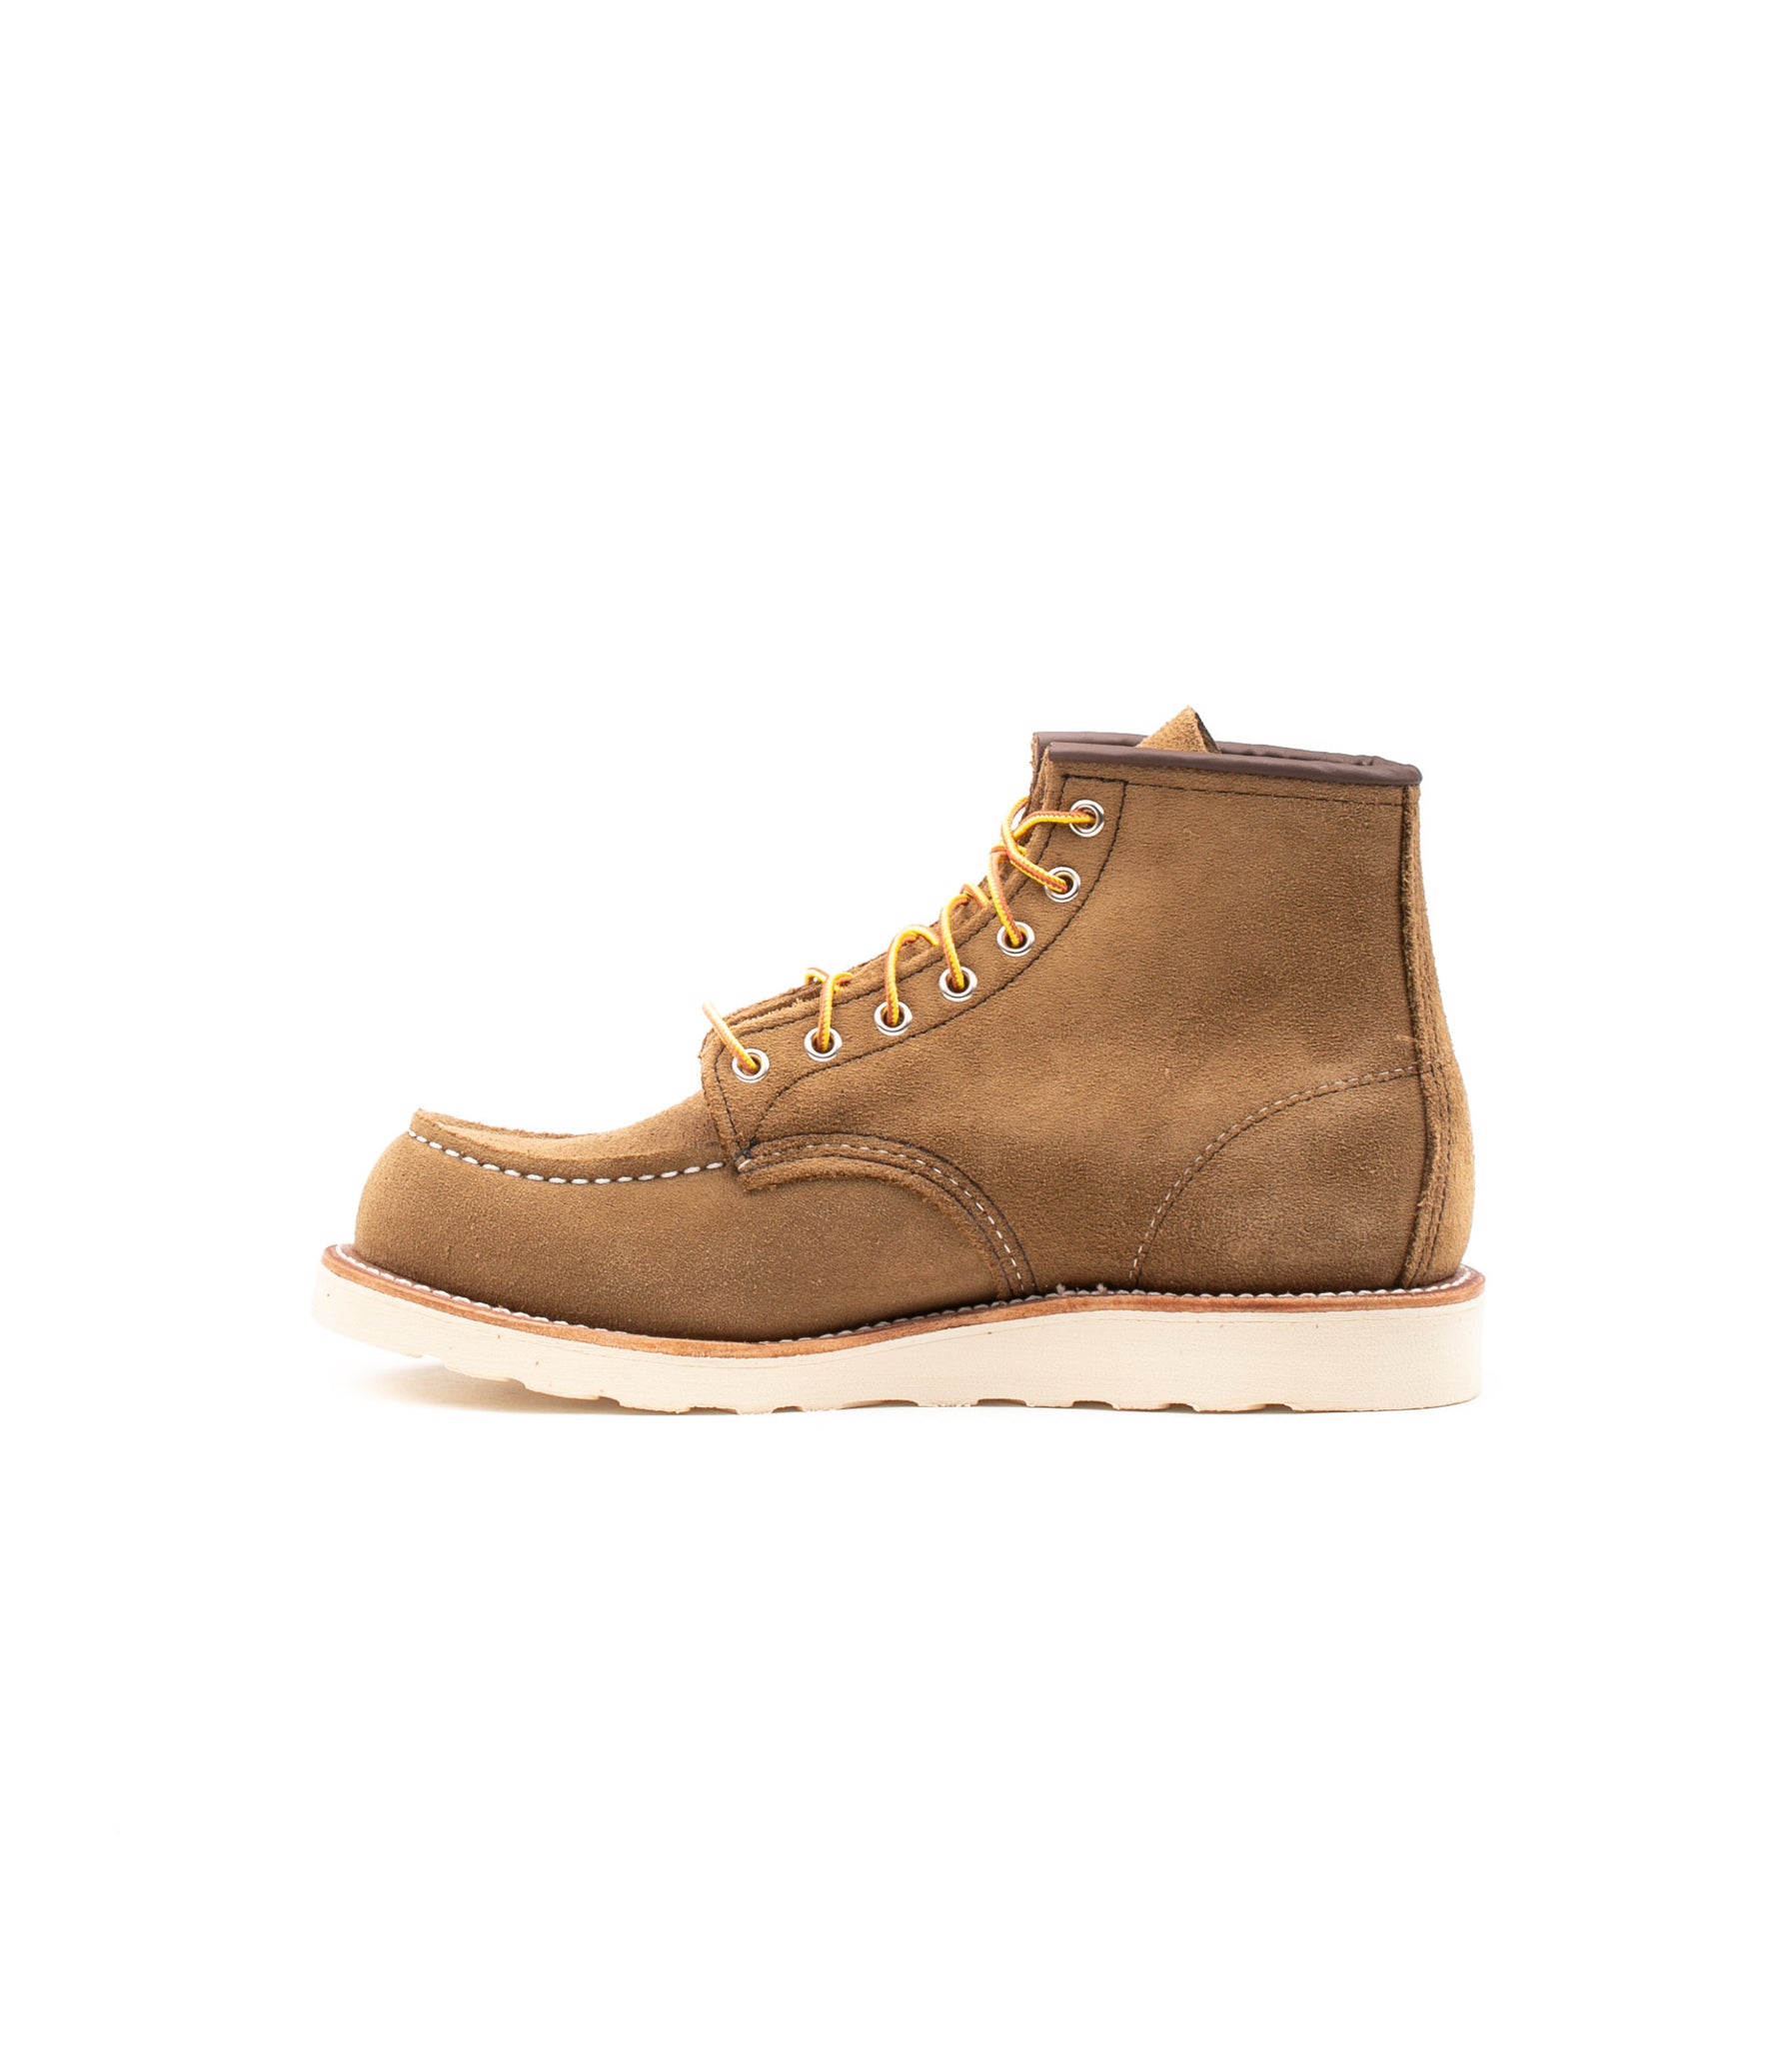 Red Wing Classic Moc 6 Inch Toe Olive Mohave Suede